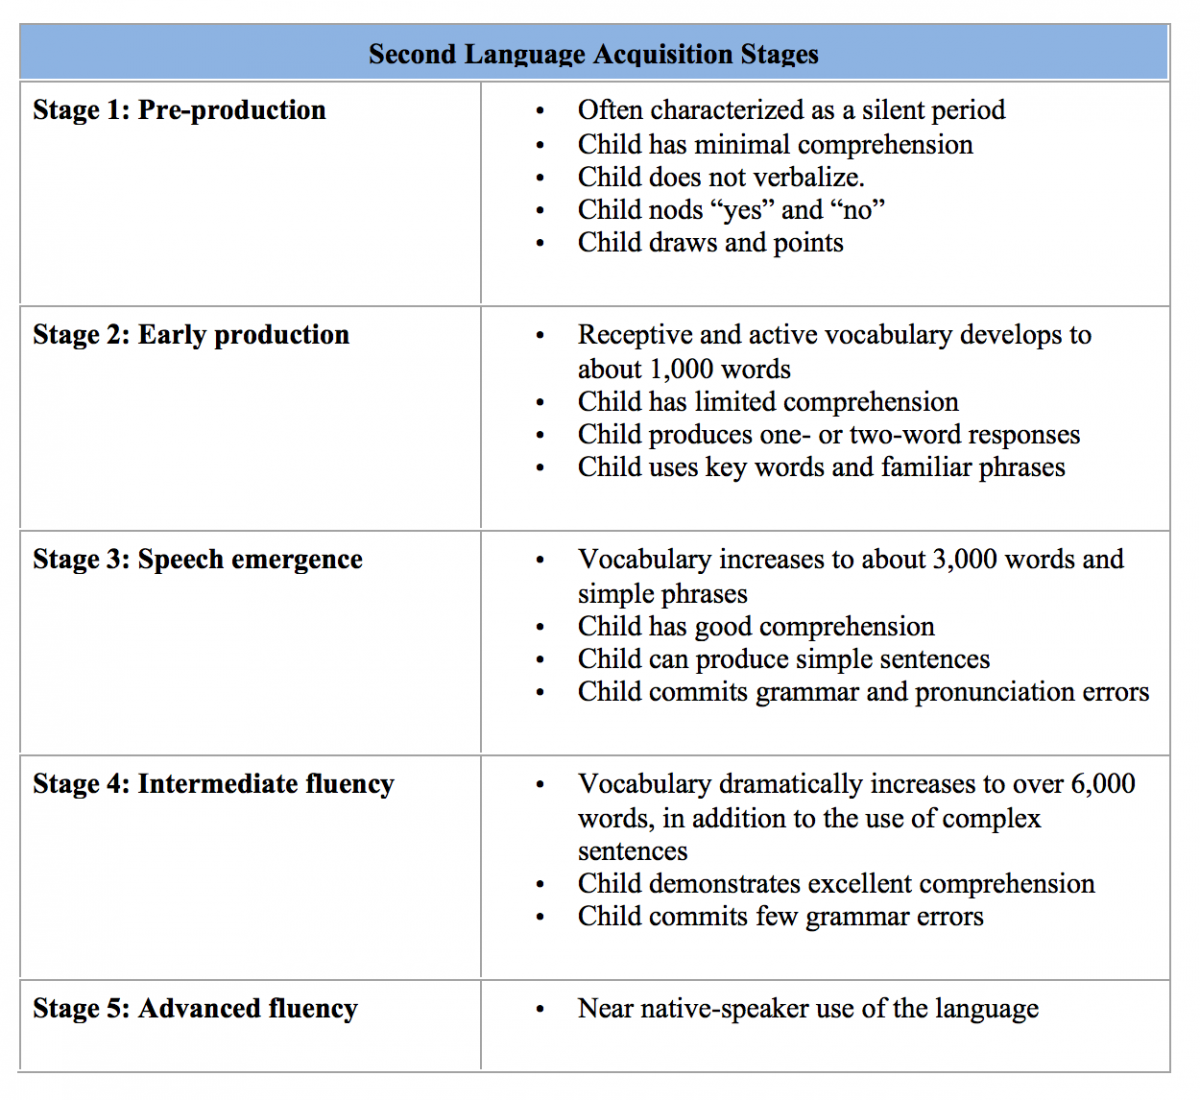 Table of Second Language Acquisition Stages